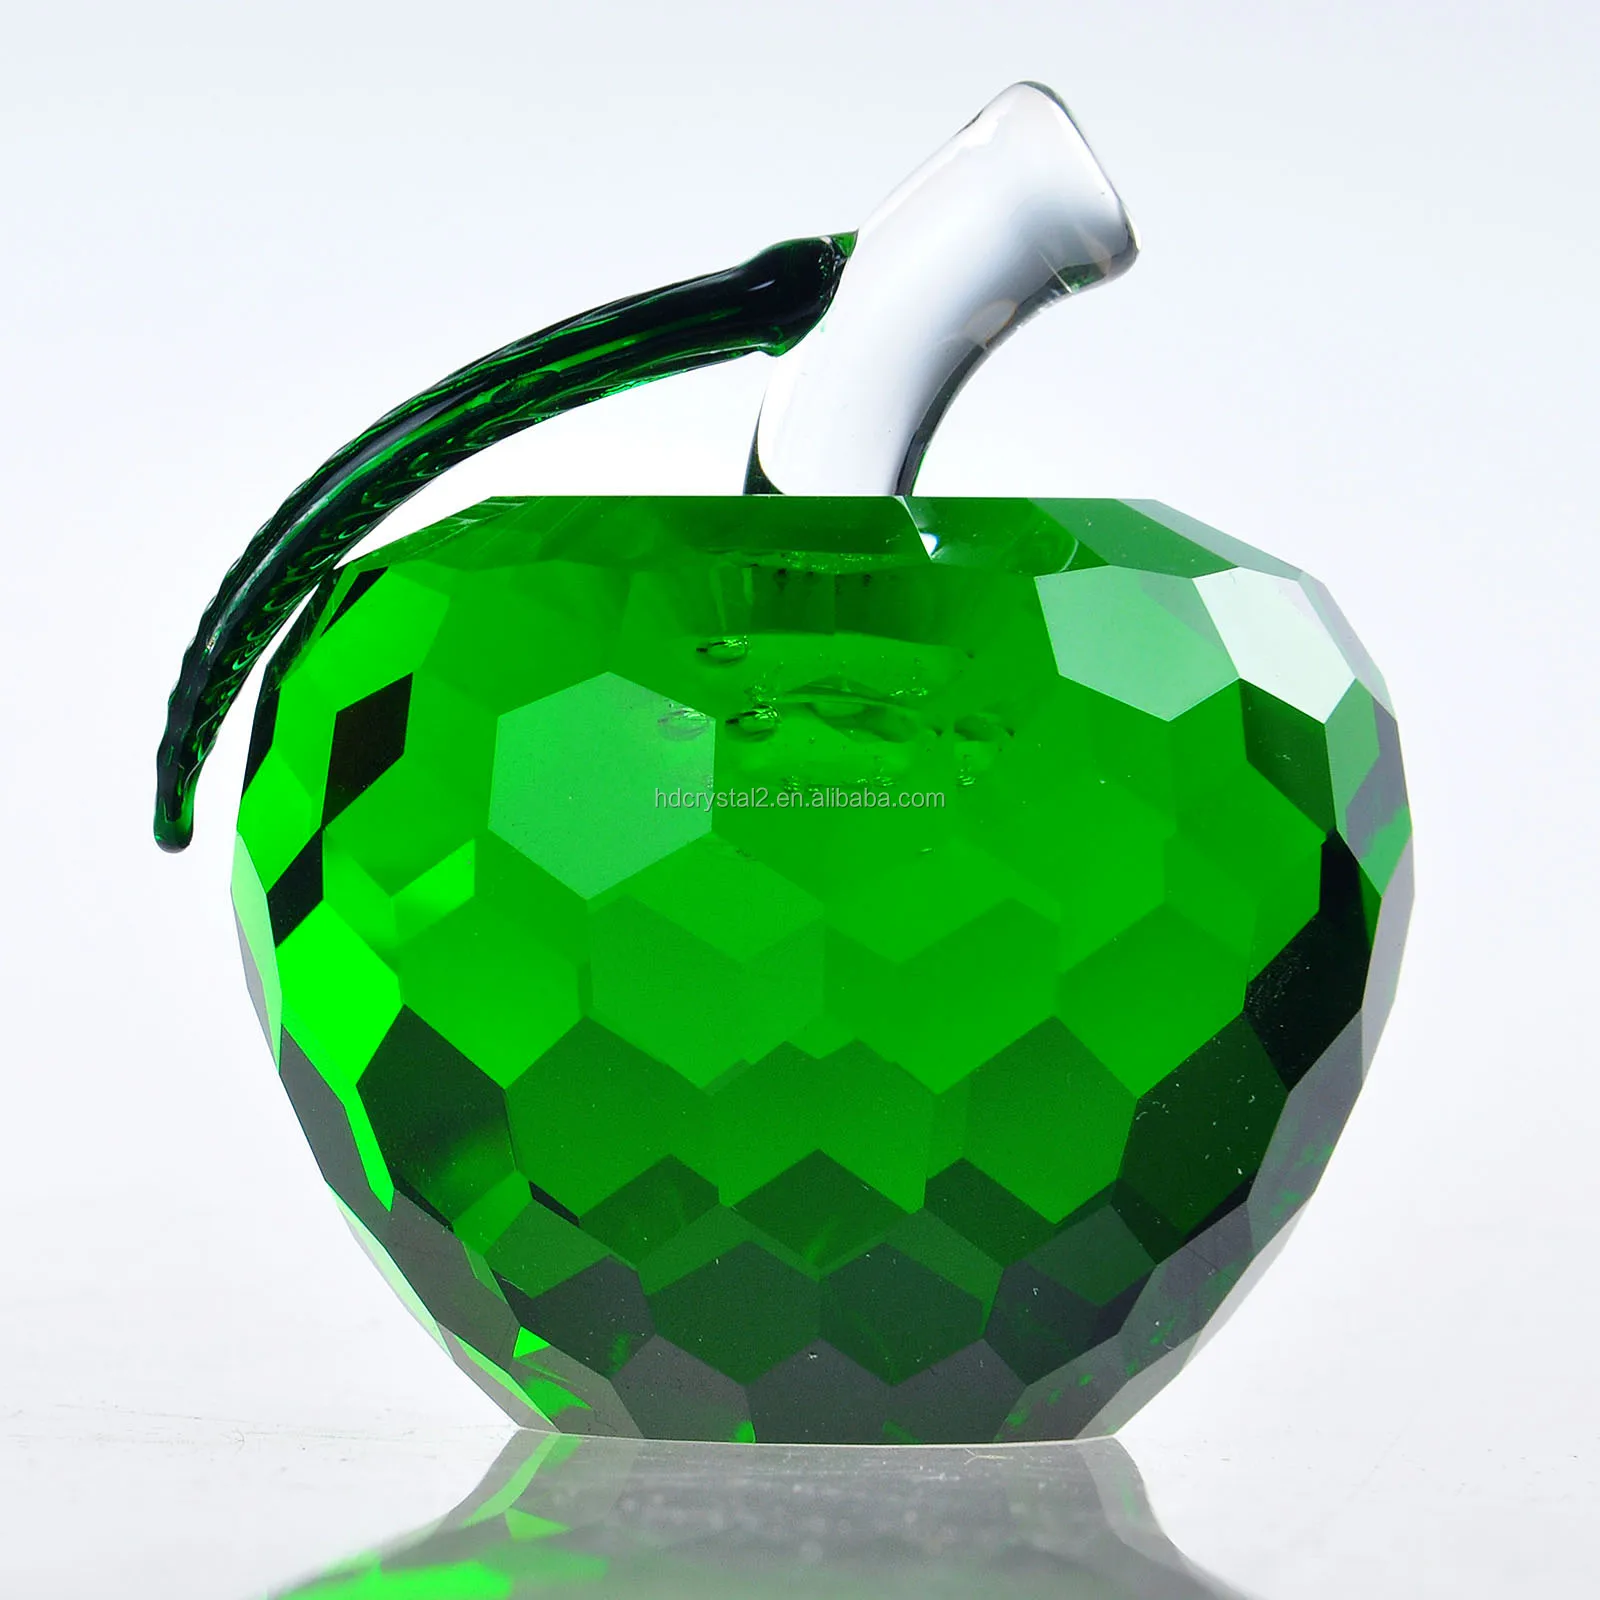 Crystal Glass Cuts 3D Apple Figurine Faceted Paperweight Wedding Gift Decor 40mm 